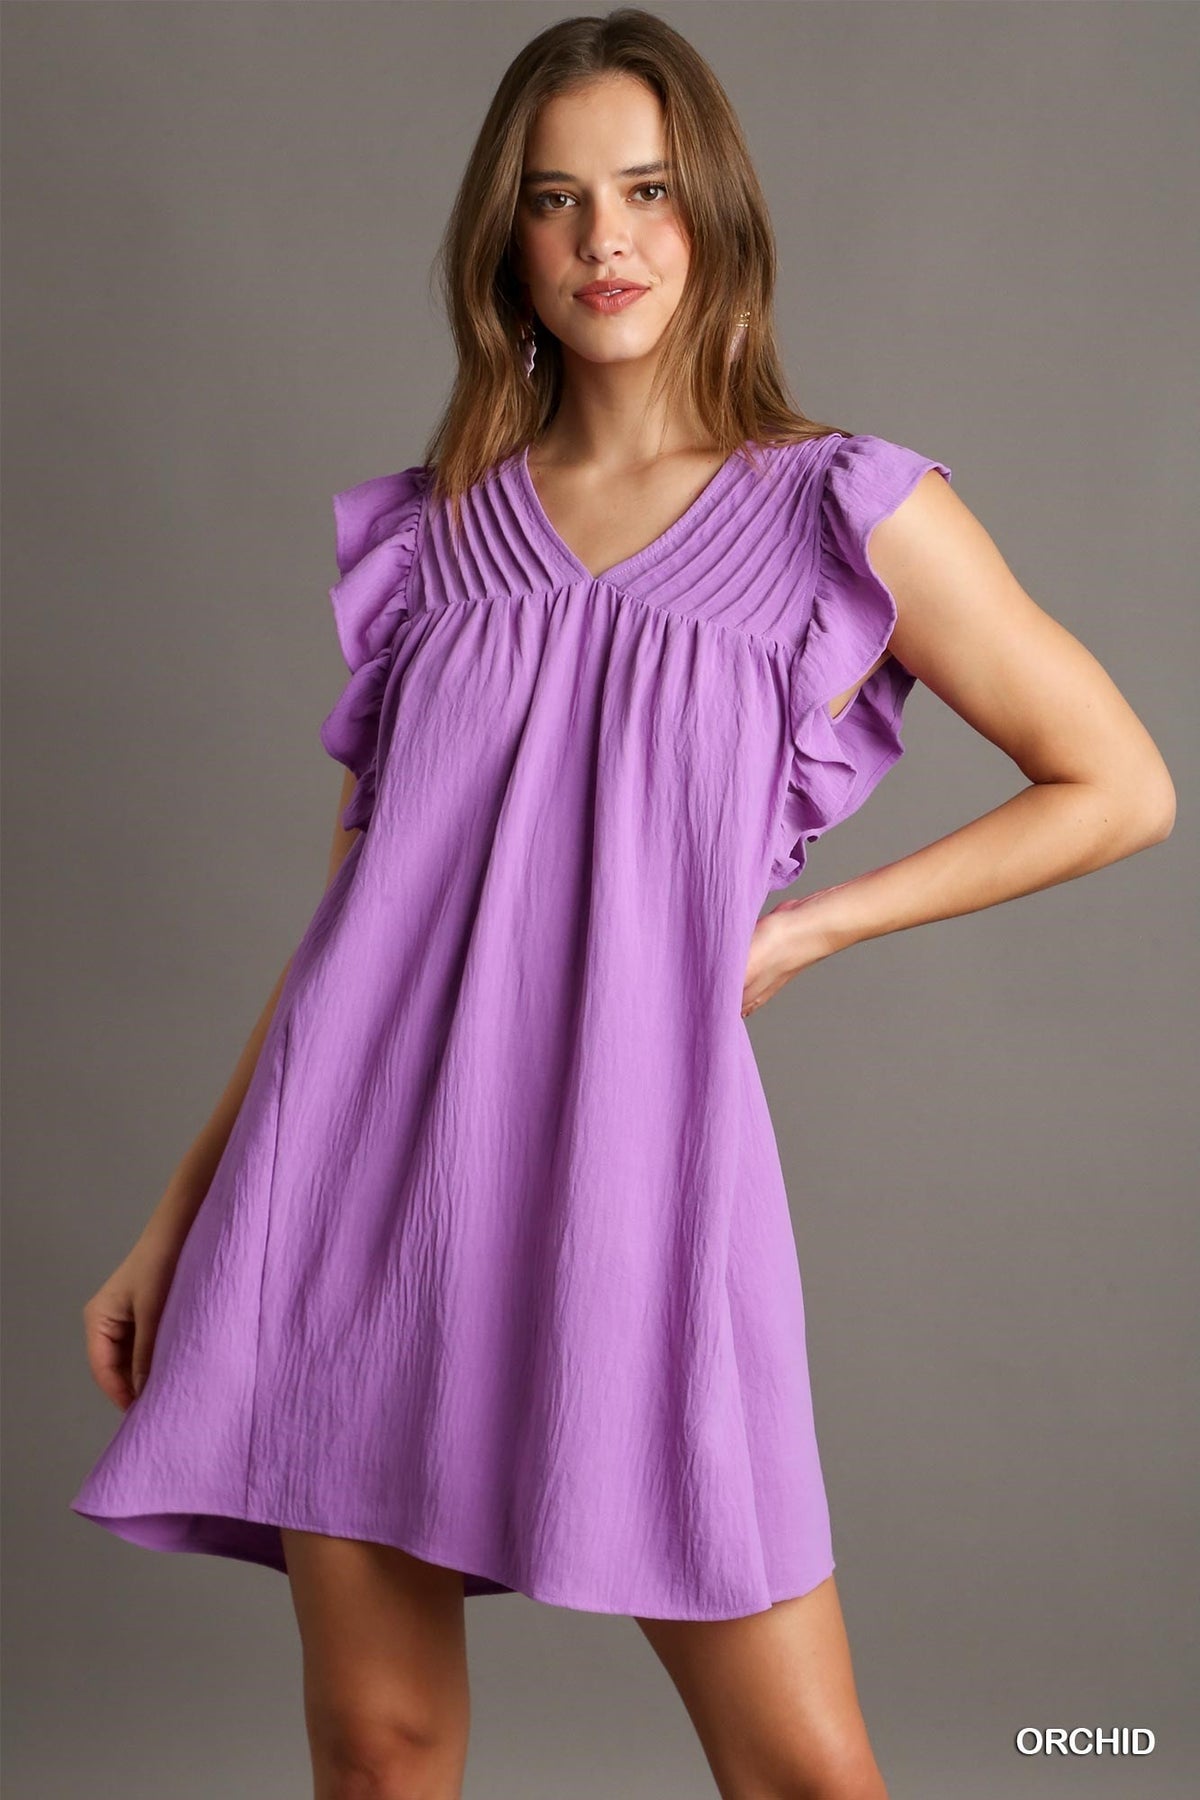 ORCHID V-NECK SHIFT DRESS WITH RUFFLE SLEEVES